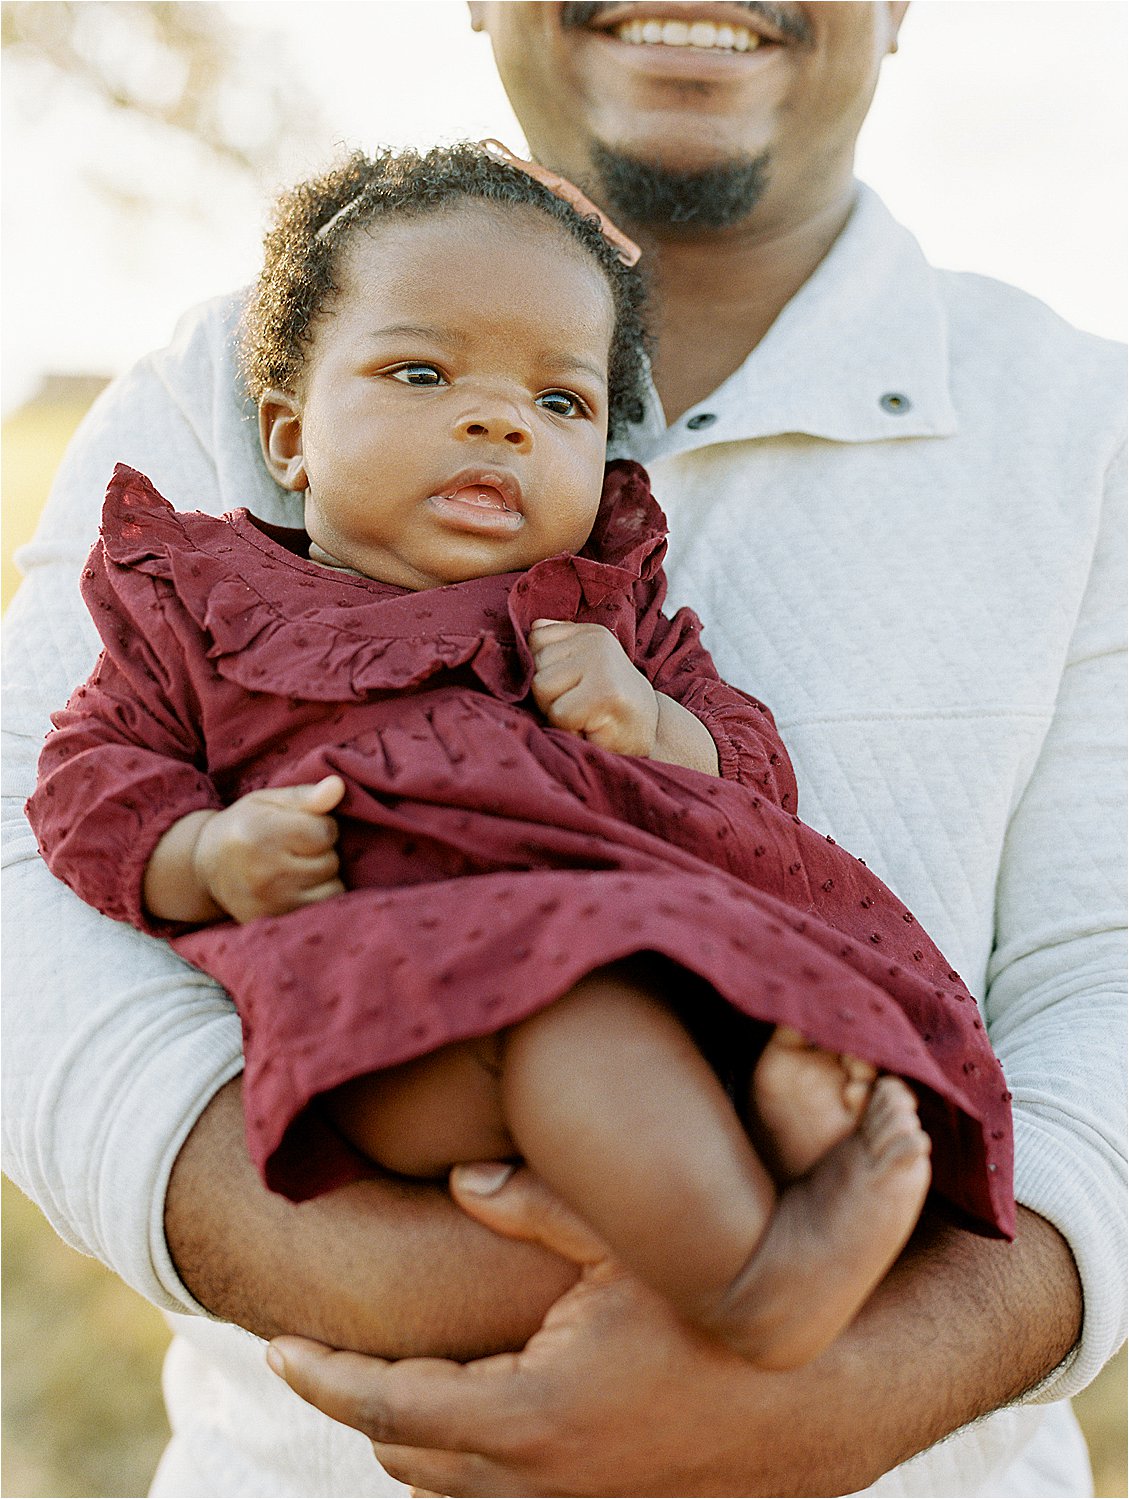 Father and Daughter at Manassas Battlefield Park Family Session on Film with Renee Hollingshead